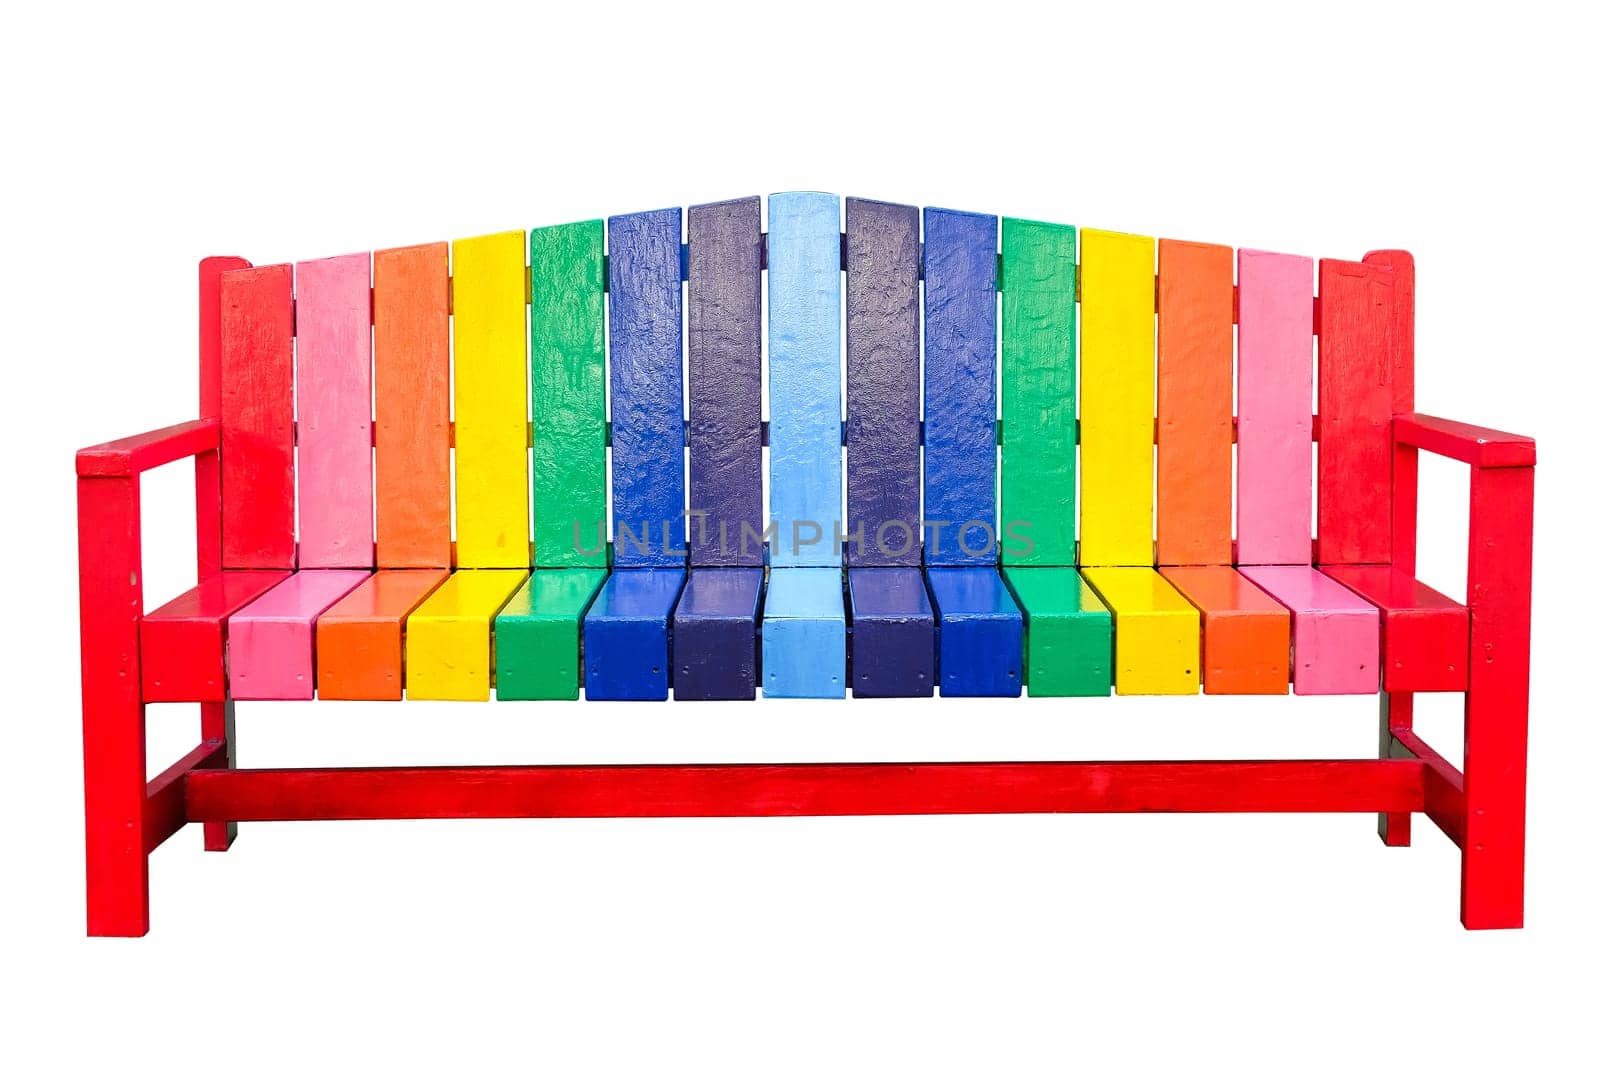 Colorful wooden bench isolated on white background. by ponsulak